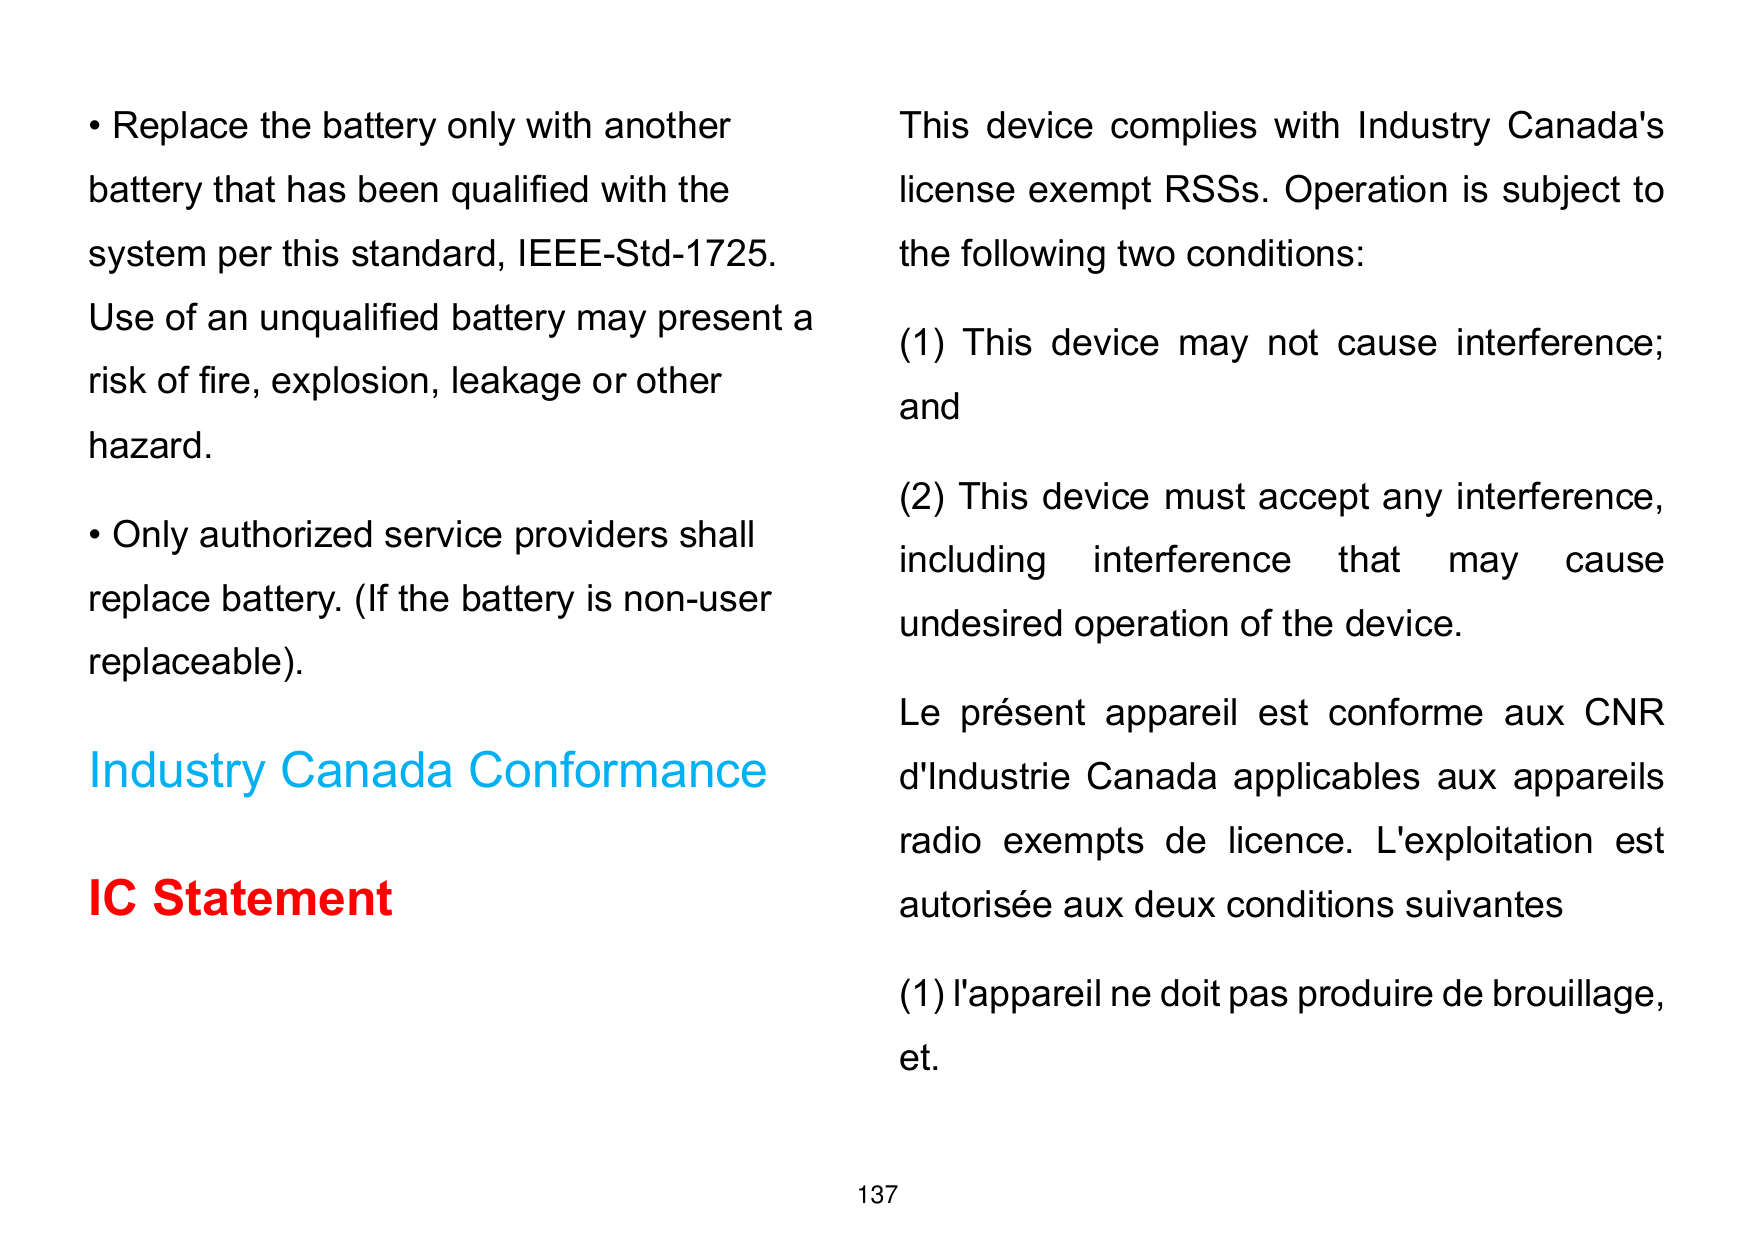 • Replace the battery only with anotherThis device complies with Industry Canada'sbattery that has been qualified with thelicens